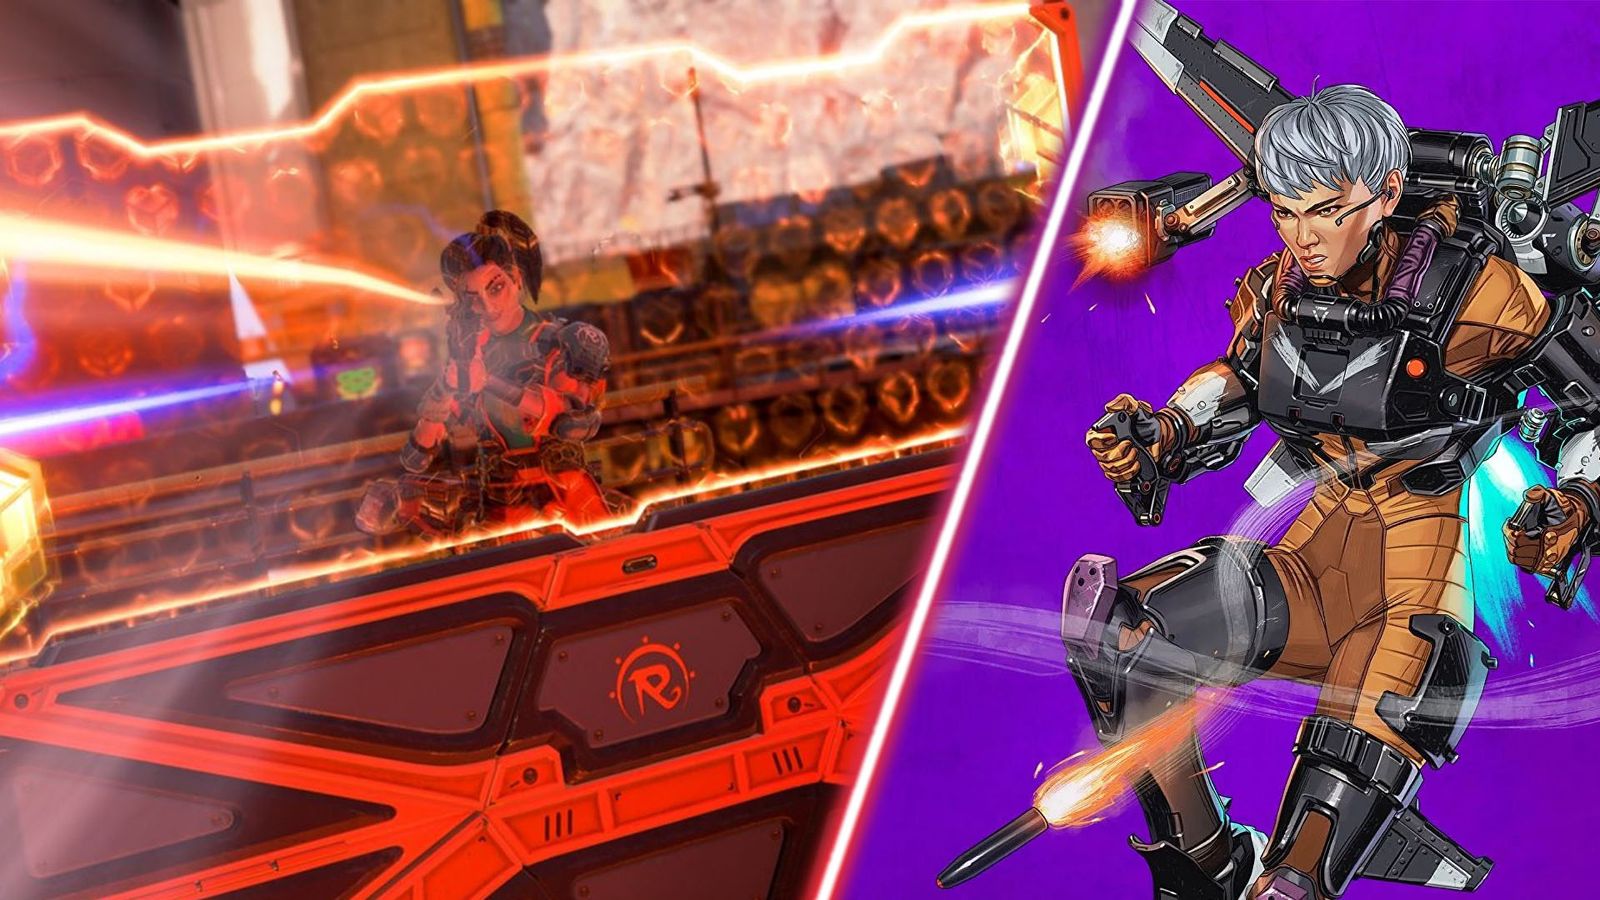 Screenshot of Apex Legends player hiding behind shield and Valkyrie flying in front of purple background